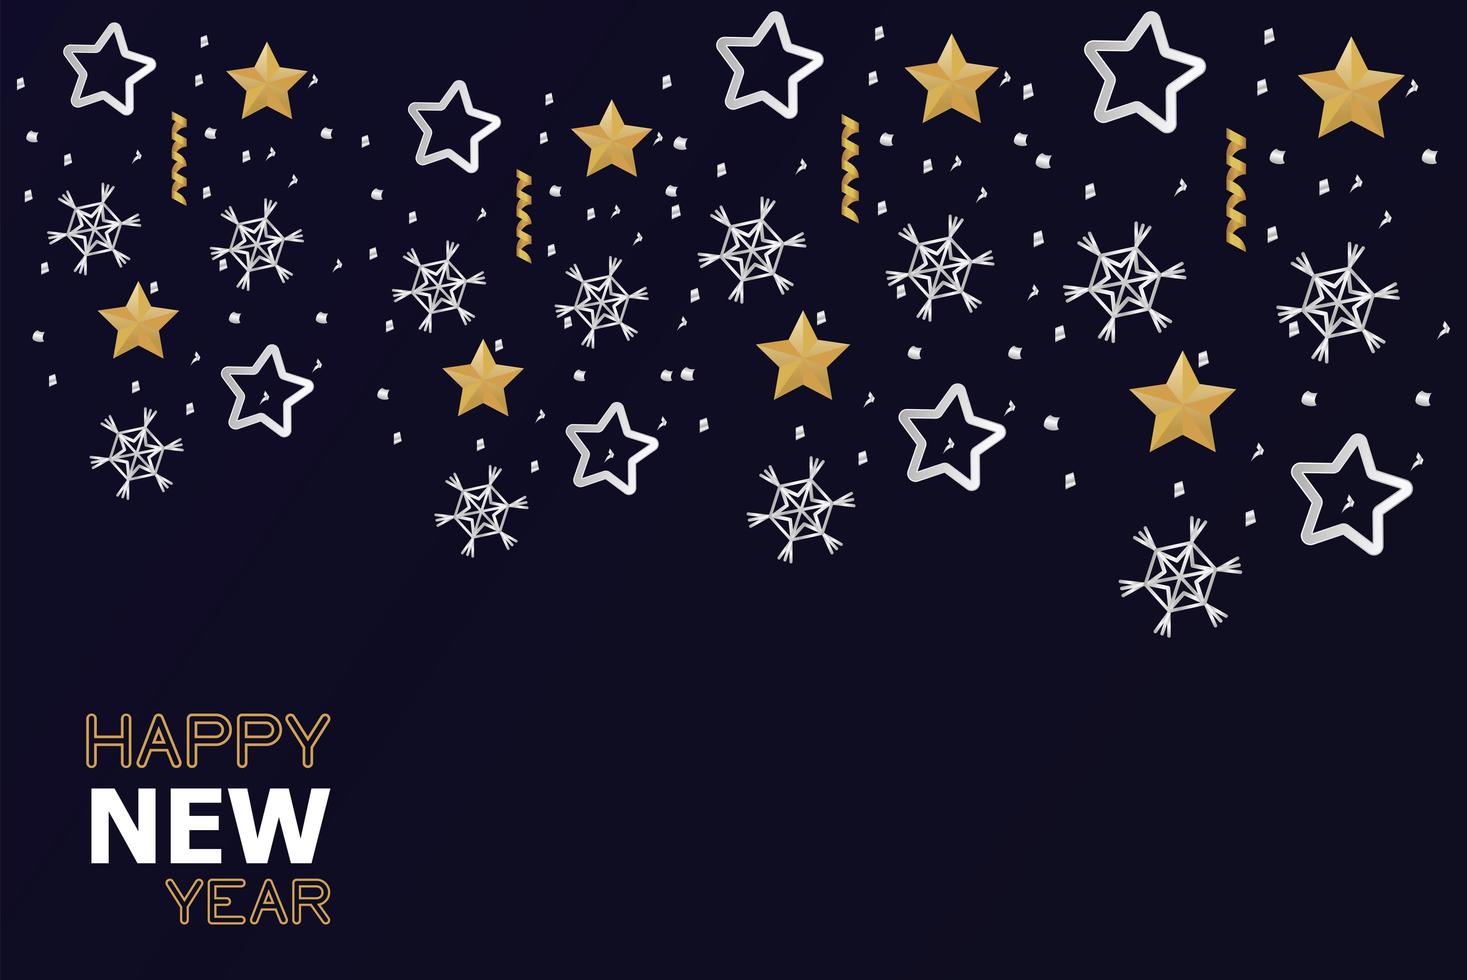 happy new year card with golden and silver stars vector